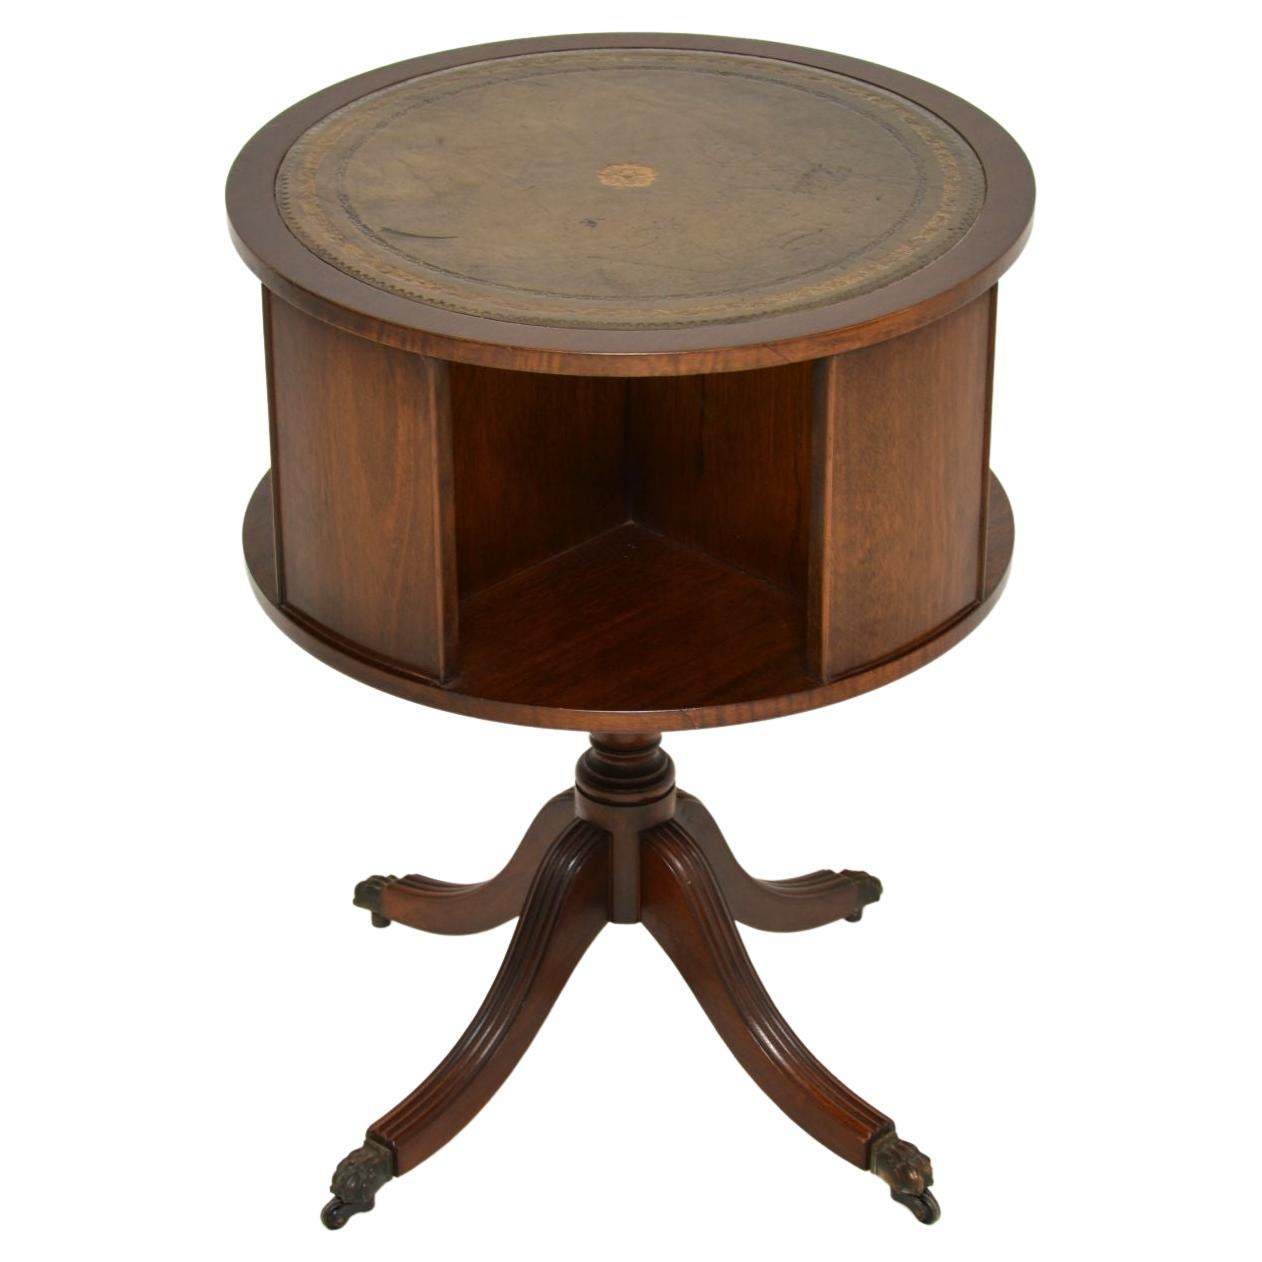 Antique Regency Style Drum Table / Book Stand